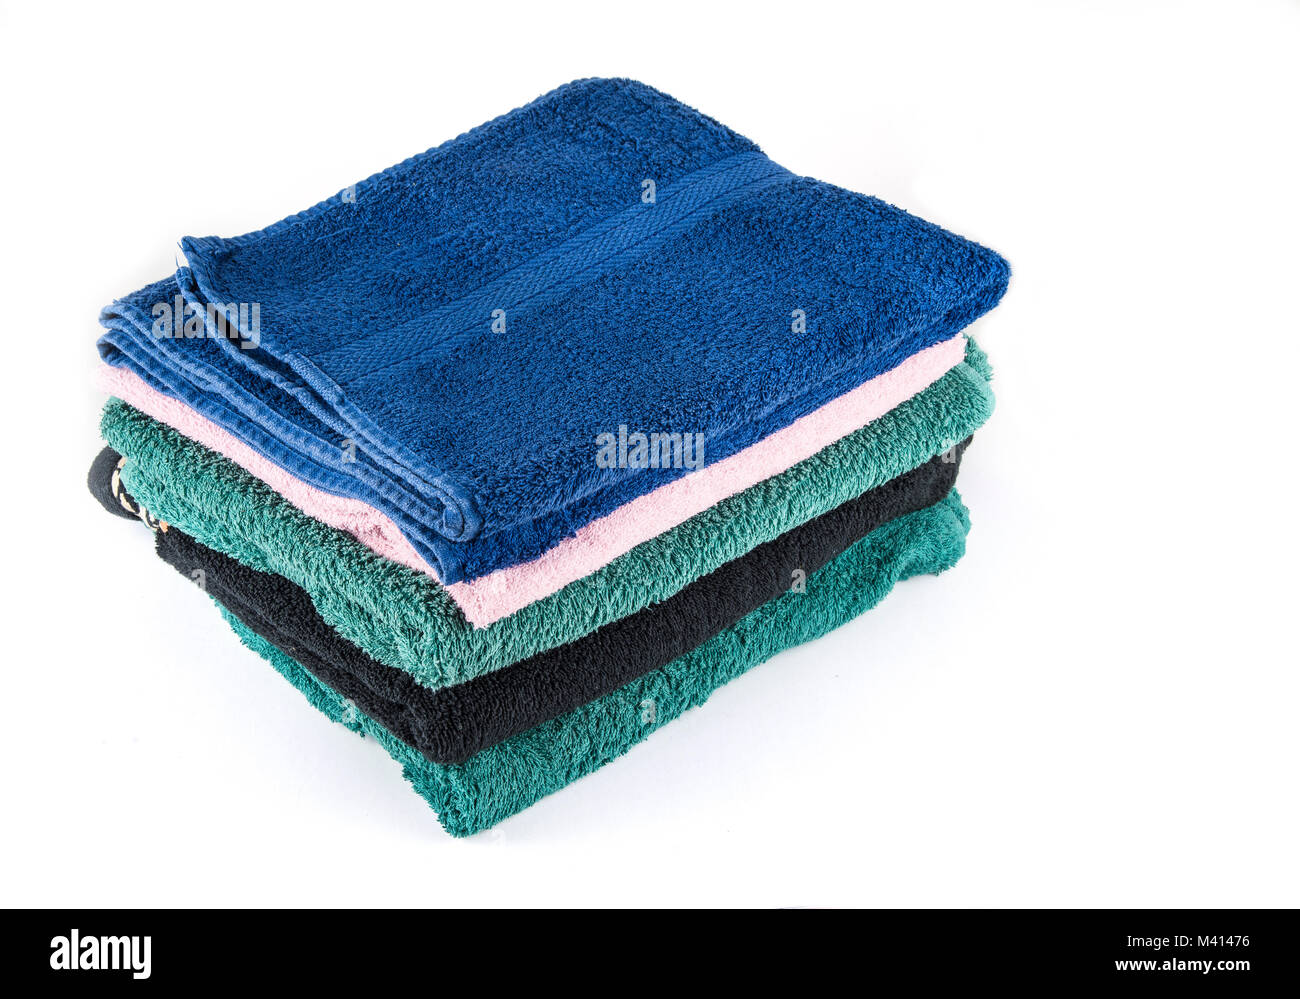 Medium towels for the bathroom and bath. Bath towels are stacked. Stock Photo